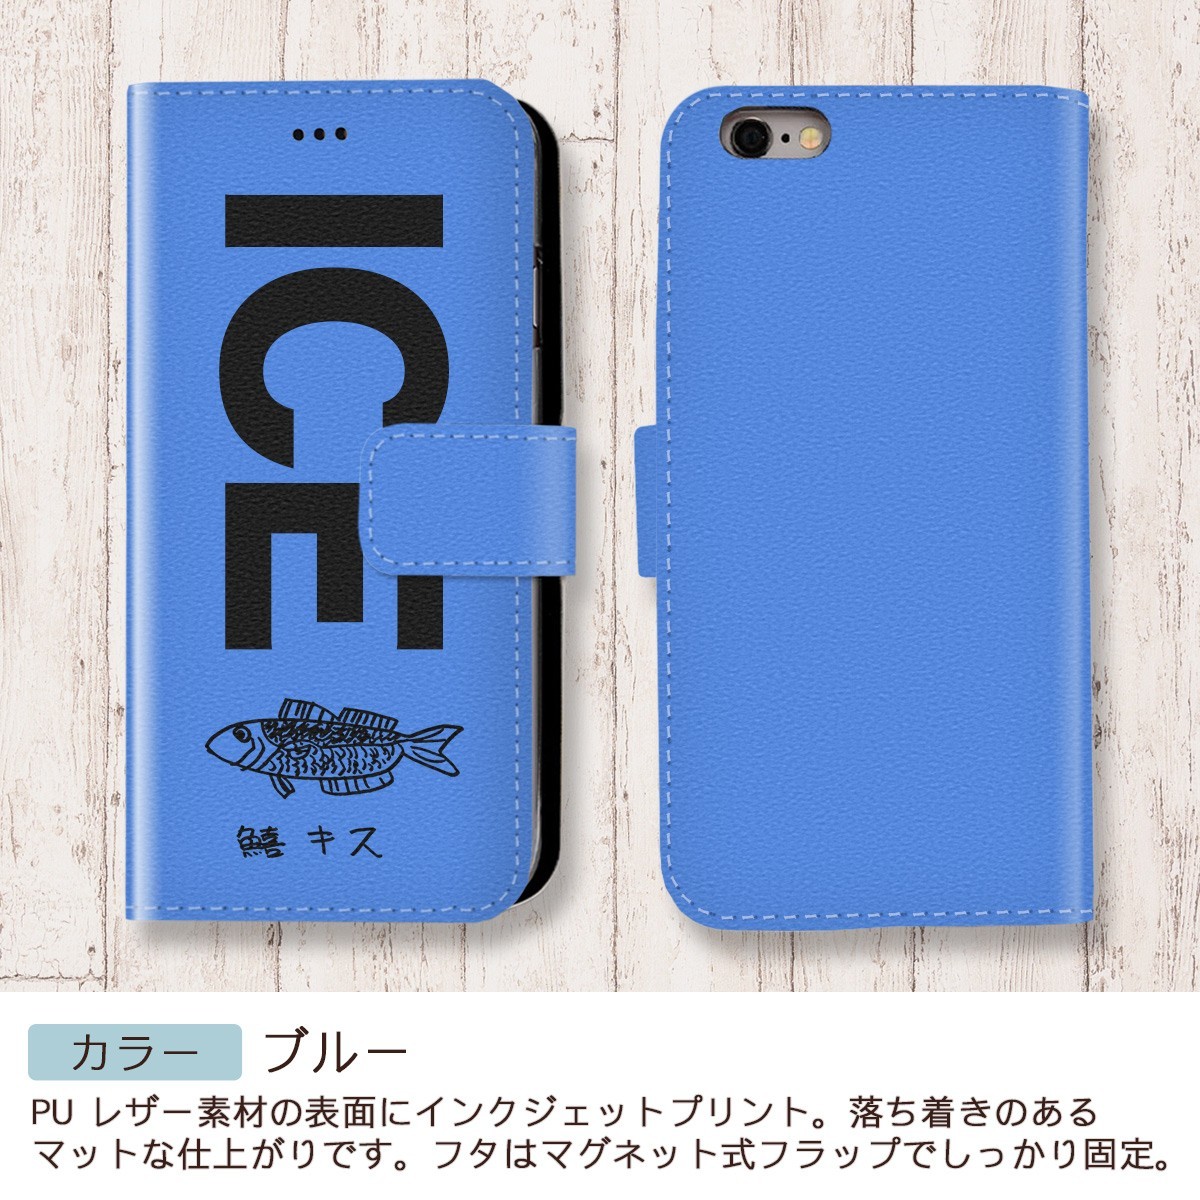  fishing interesting . Kiss white body fish side dish rice delicacy large thing big catch X XS case case iPhone X iPhone XS case notebook type iPhone 